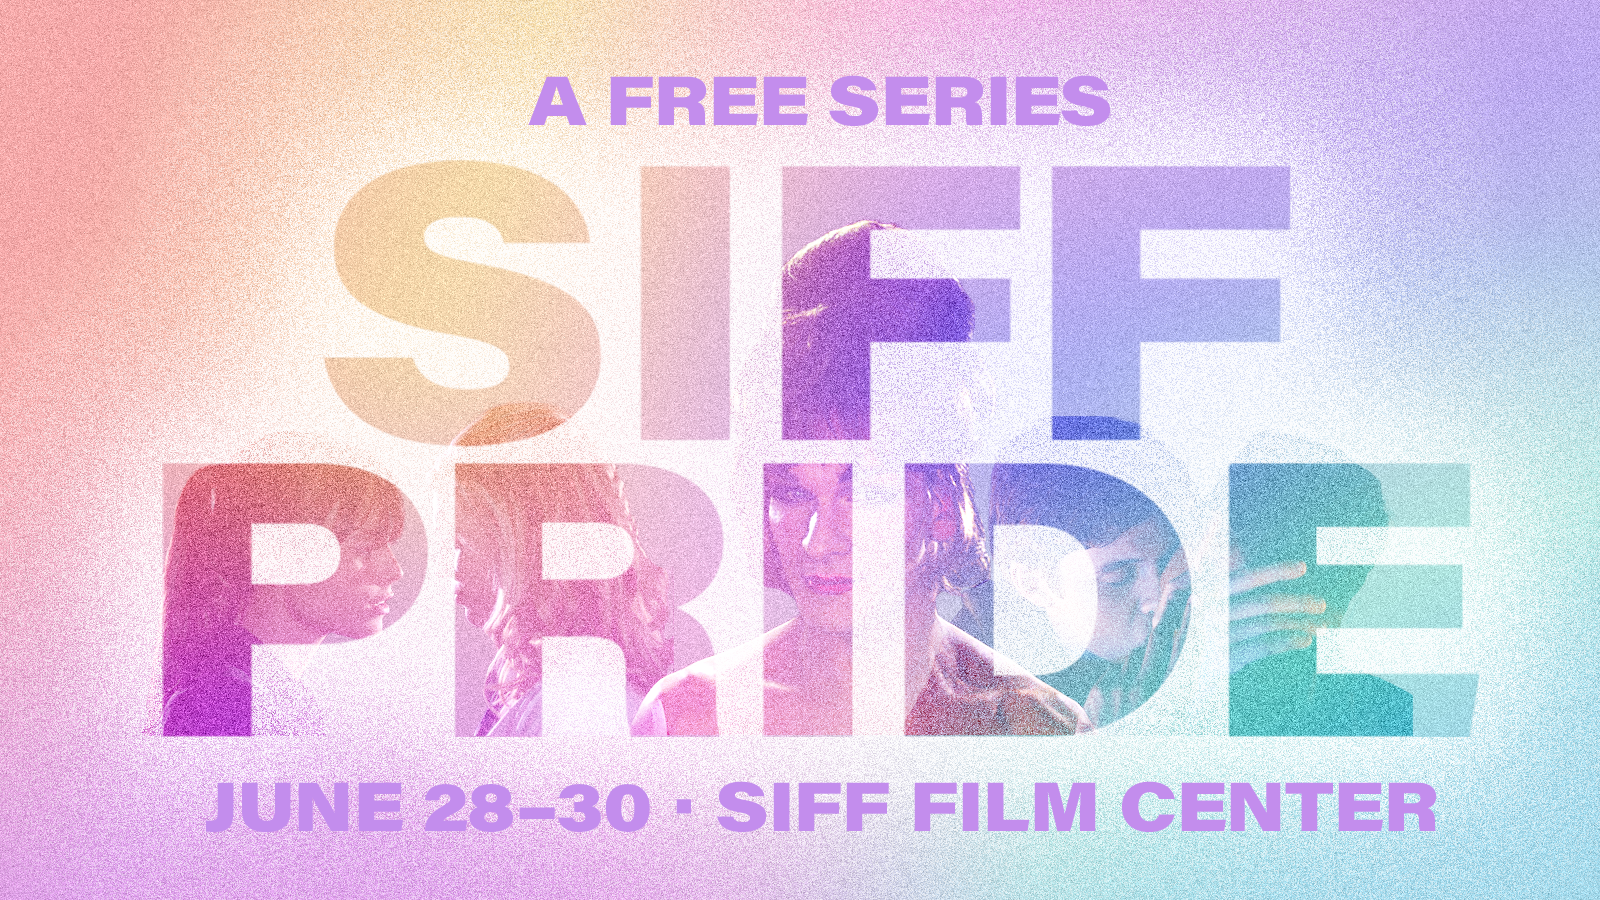 SIFF Pride | A Free Series | June 28-30 at the SIFF Film Center